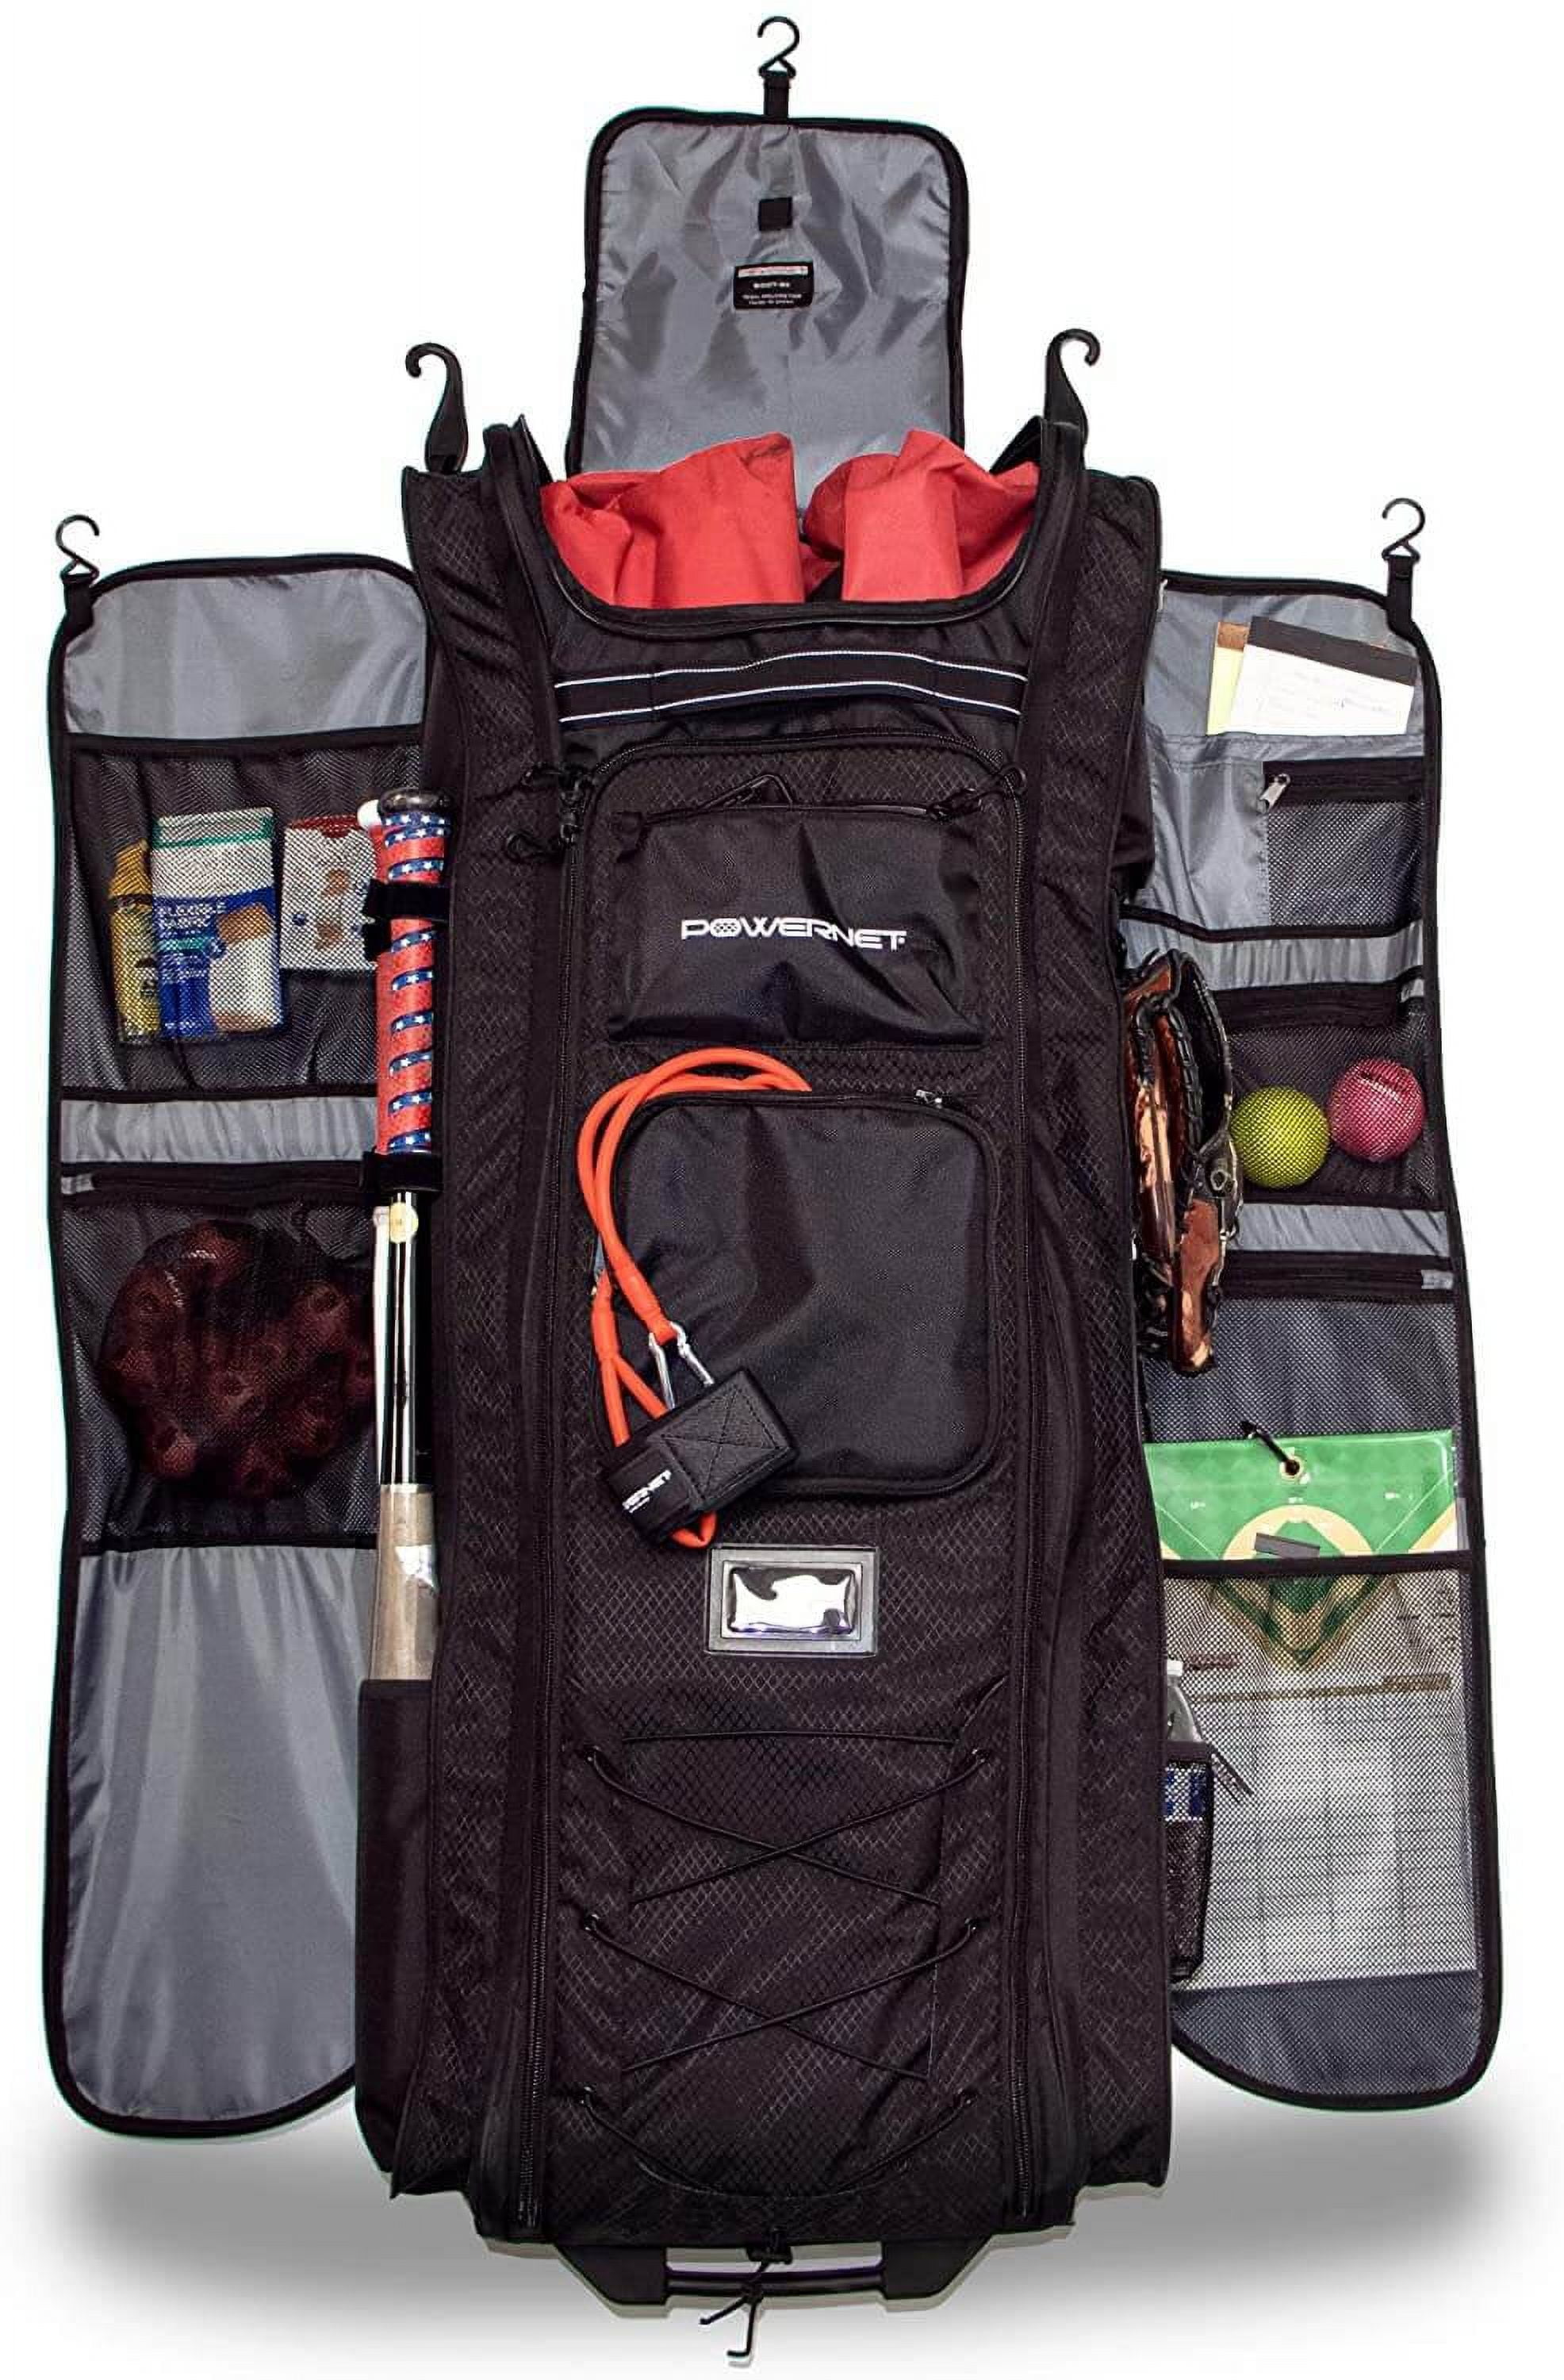 PowerNet All-Gear Transporter - Rolling Equipment Bag for Coaches (B007) 